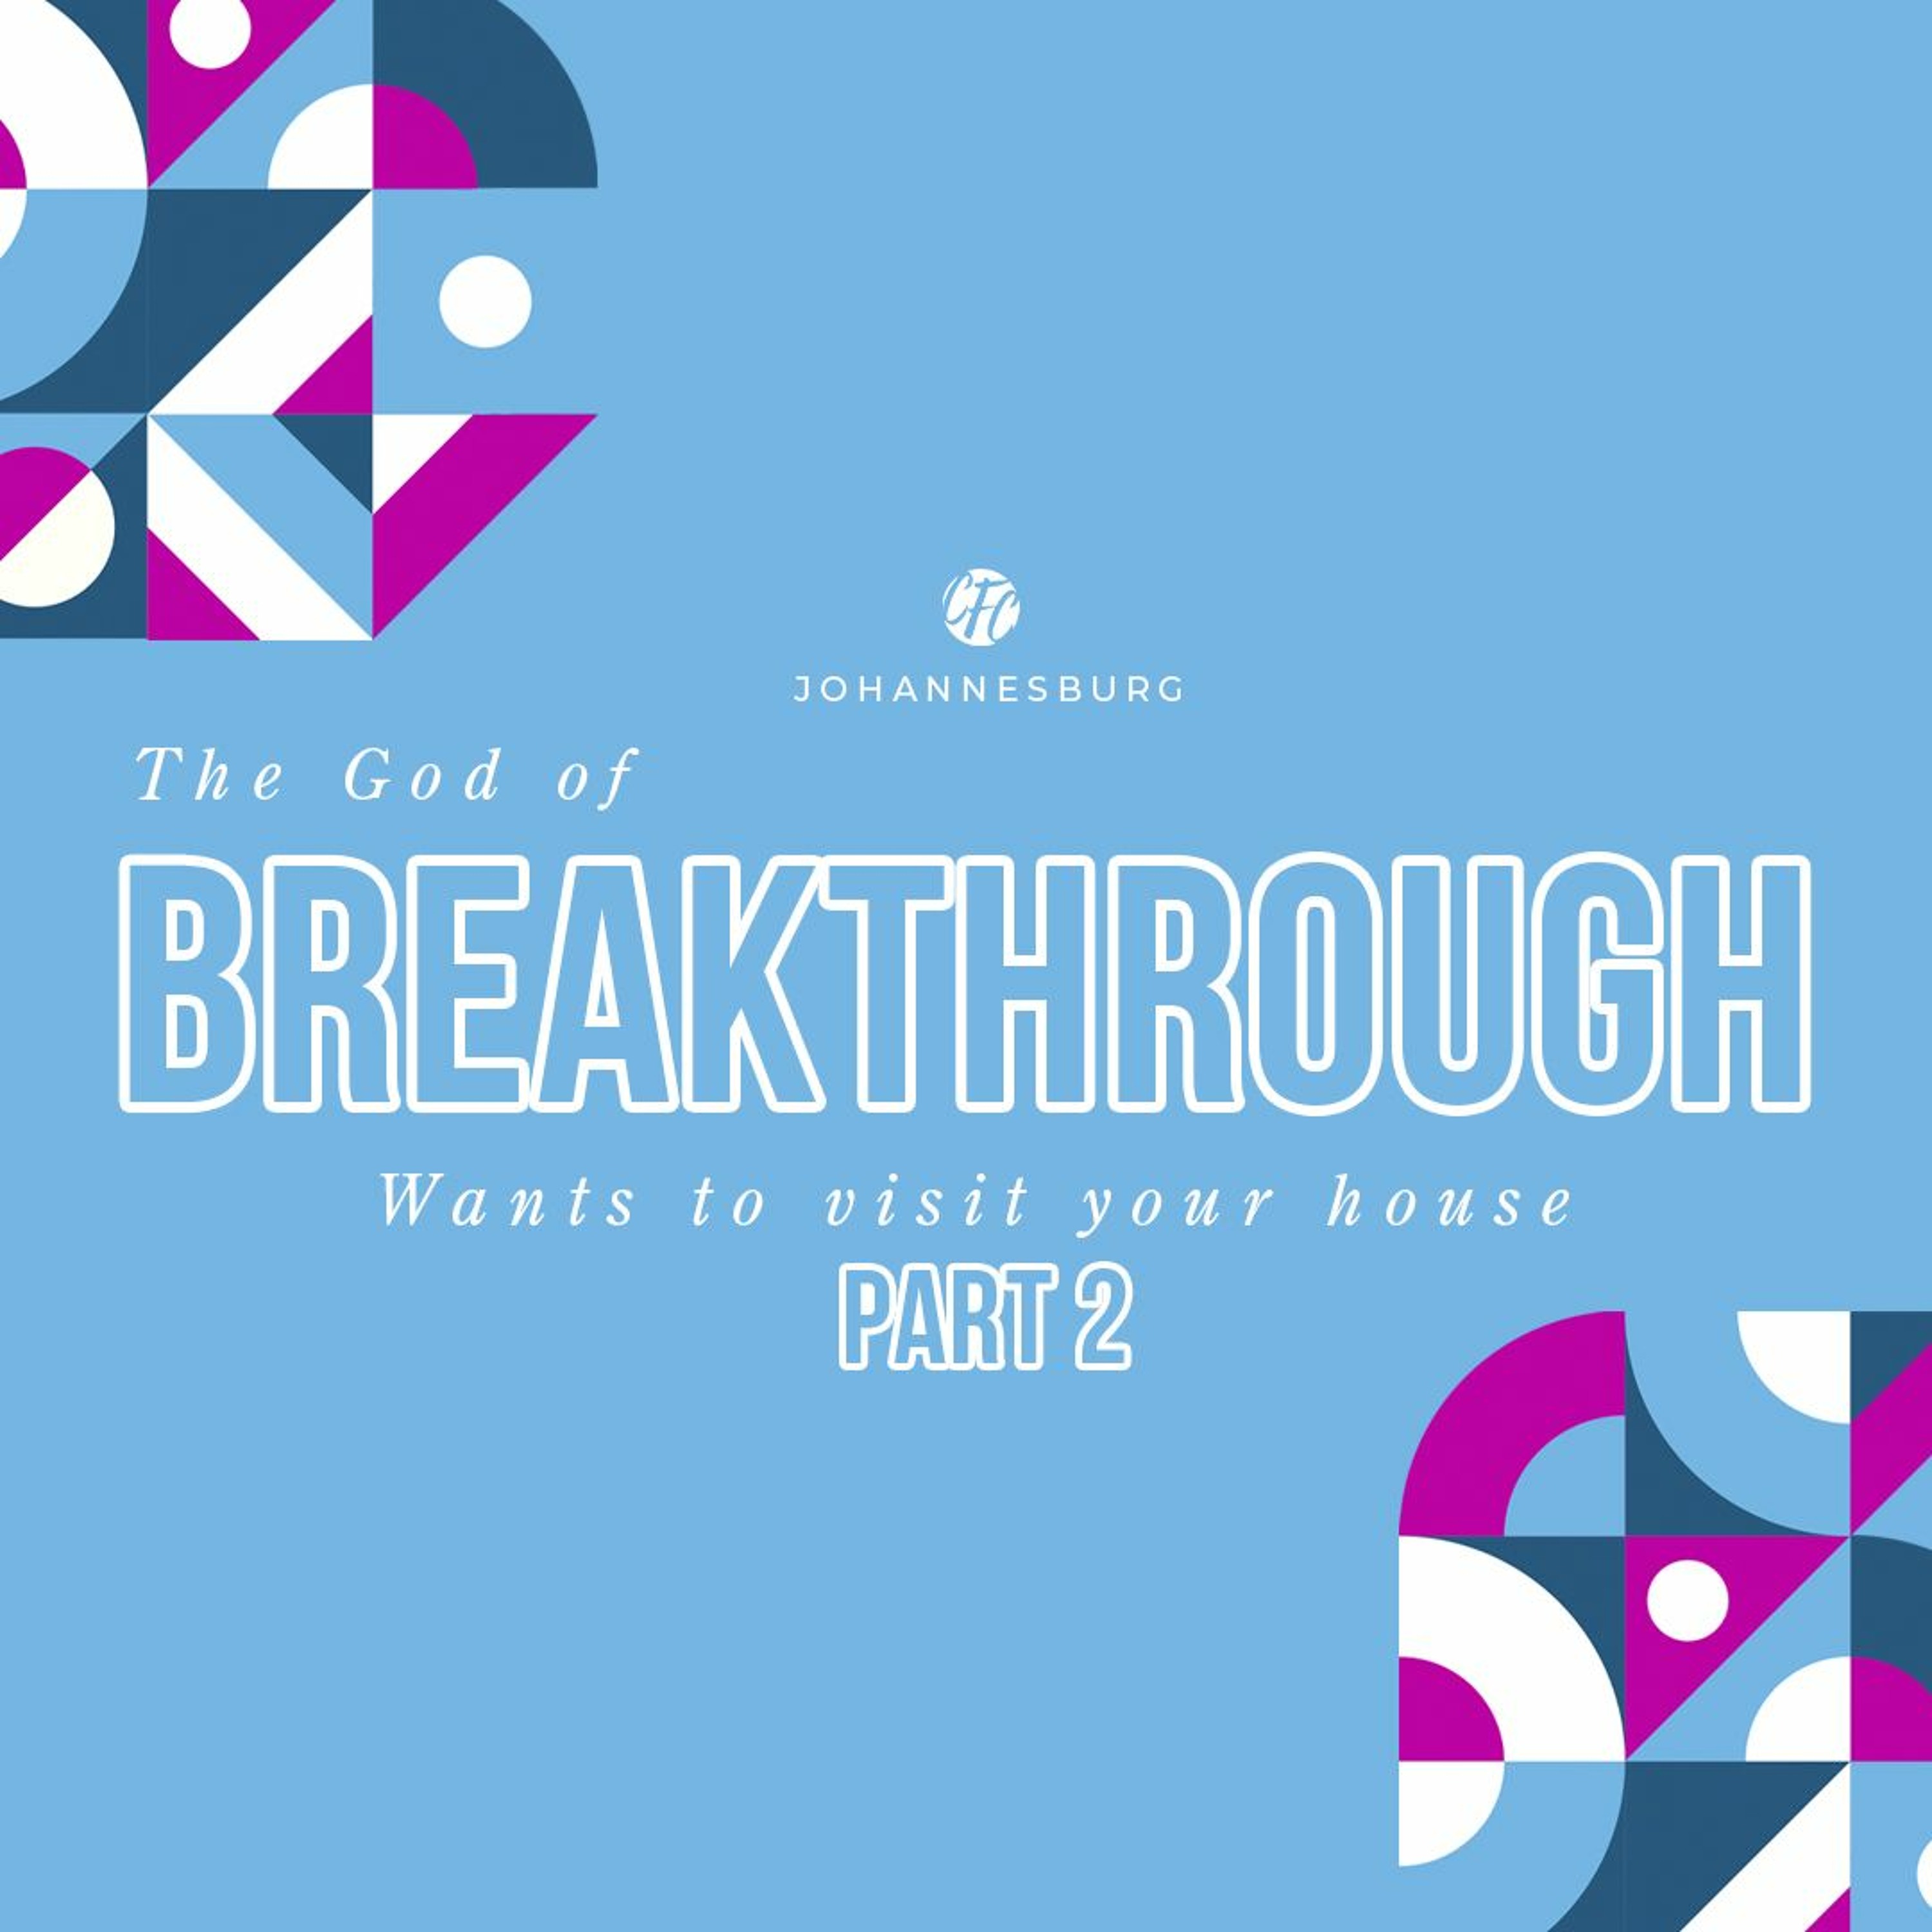 Dr. Steve Barry - The God Of Breakthrough Wants To Visit Your House - Part 2